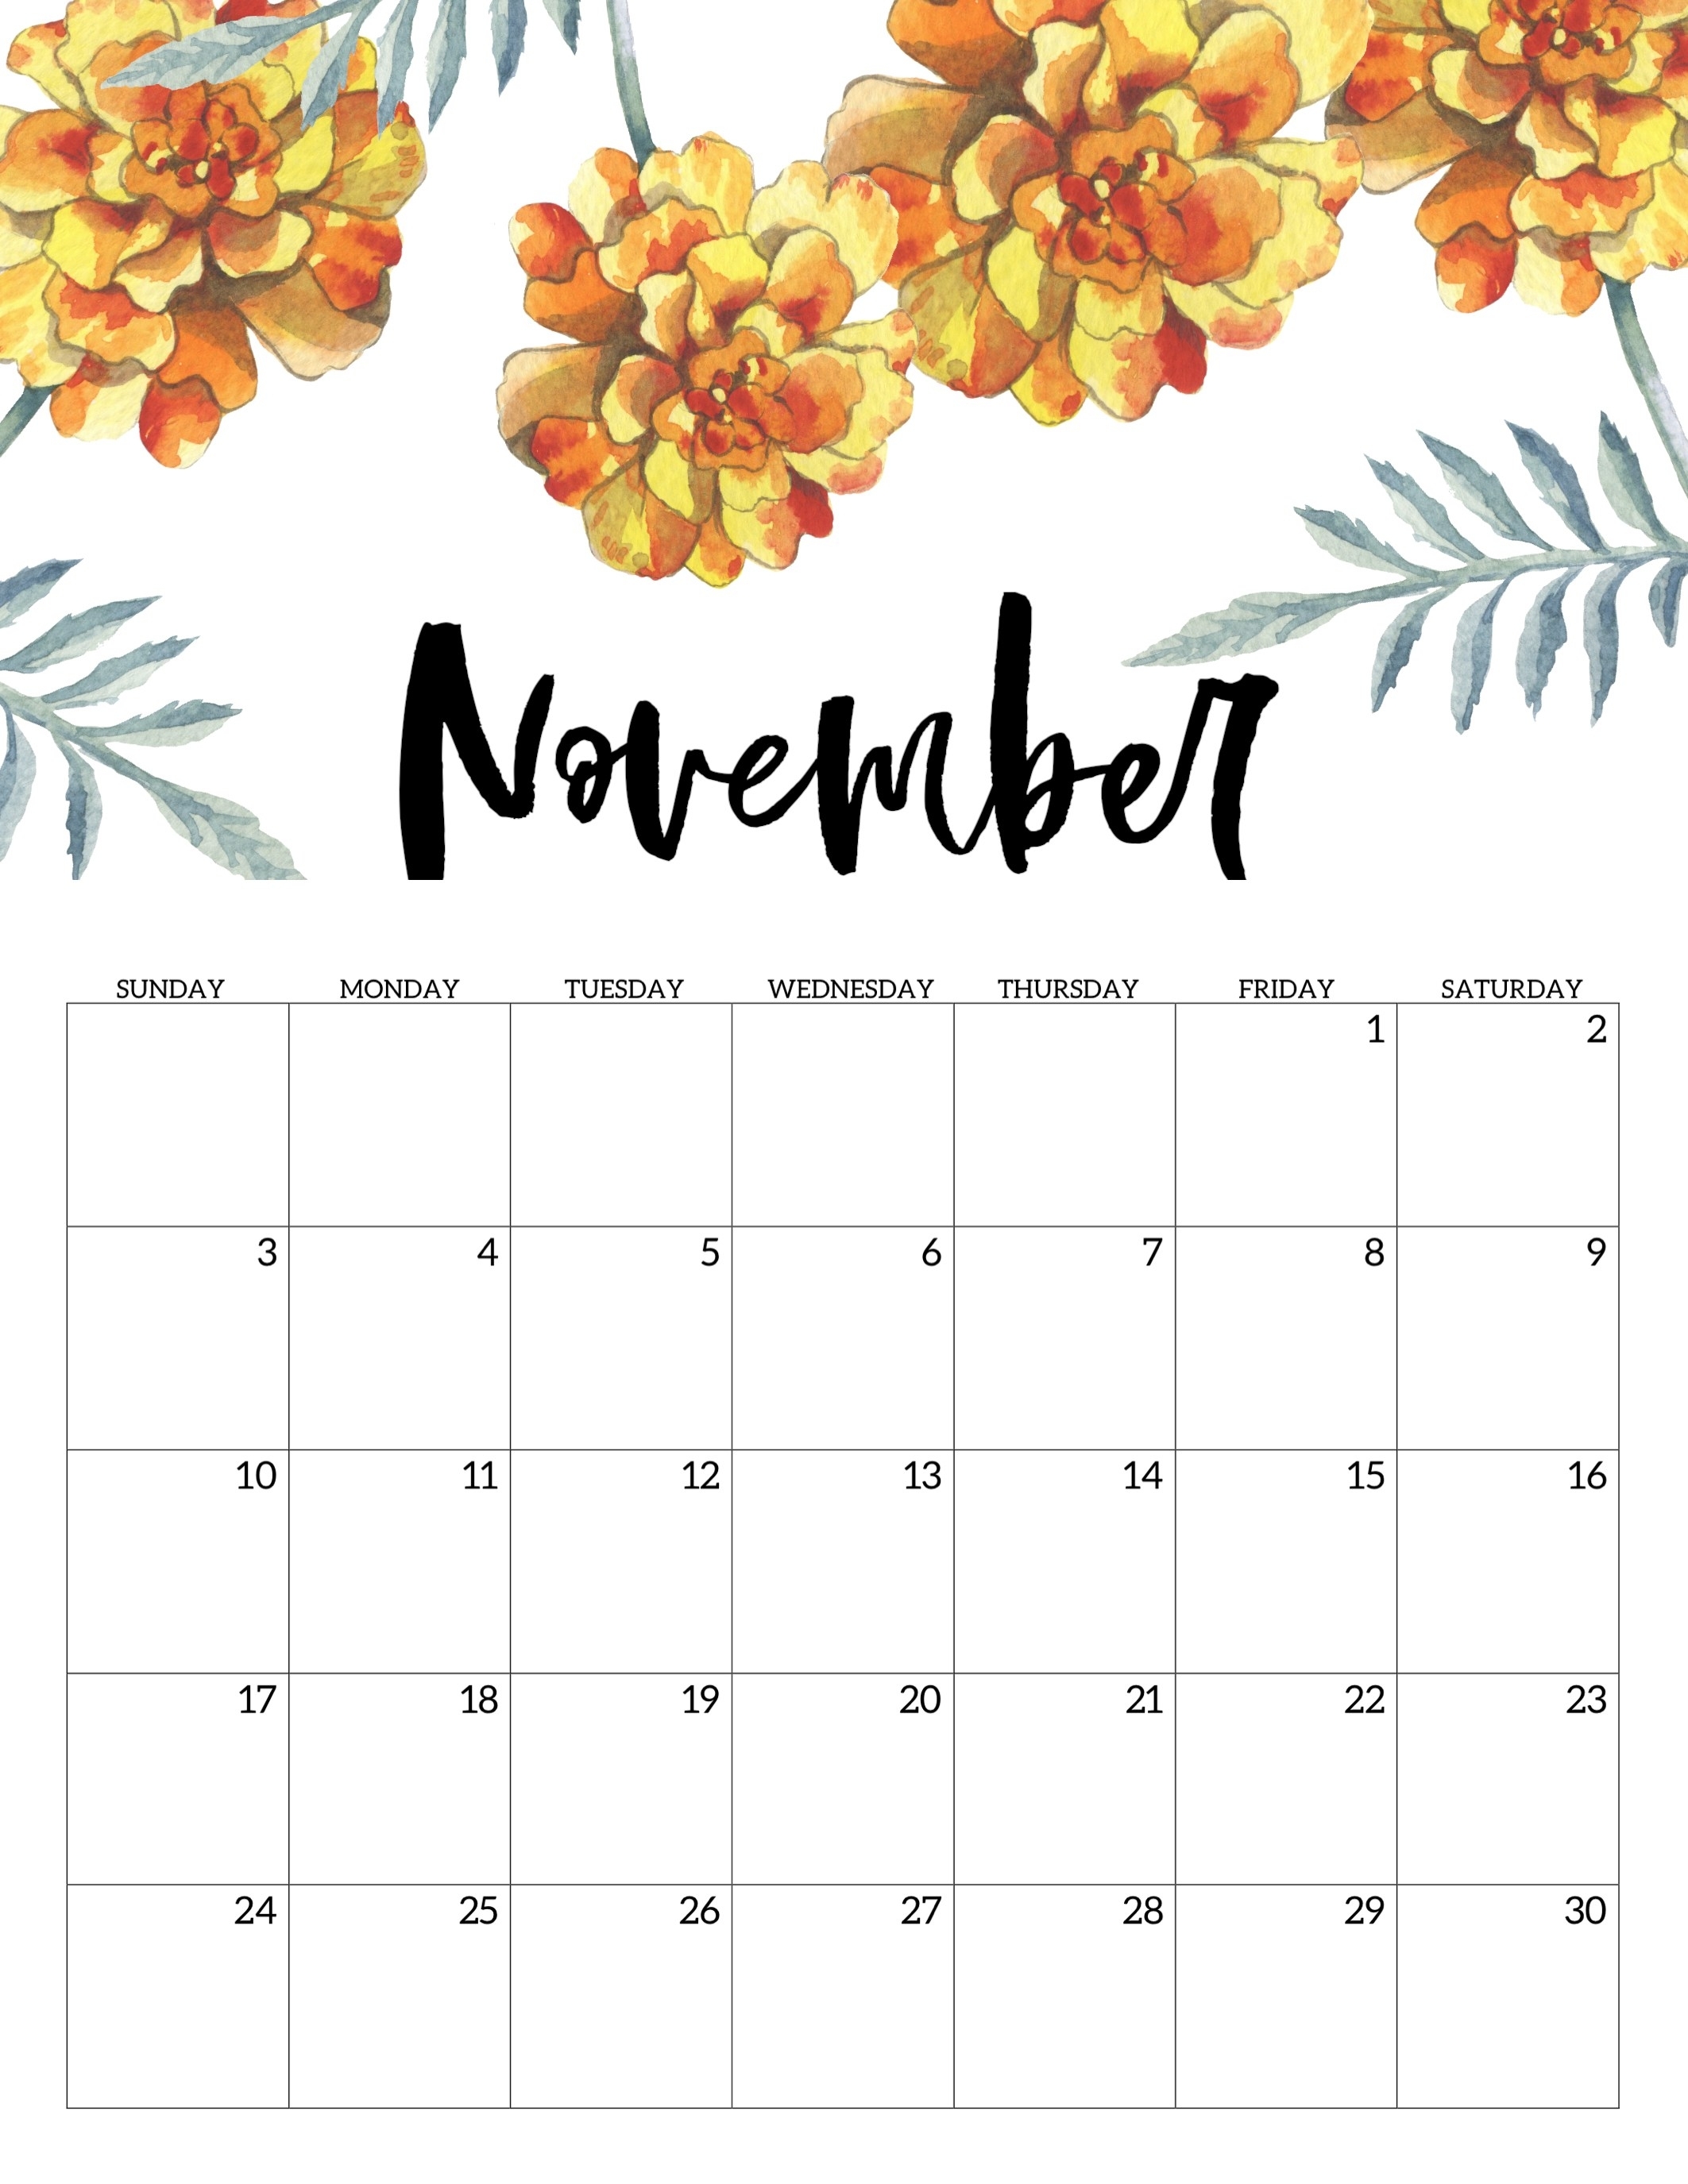 Free Printable Calendar 2019 - Floral - Paper Trail Design pertaining to Monthly Calendar Watercolor Floral Printable